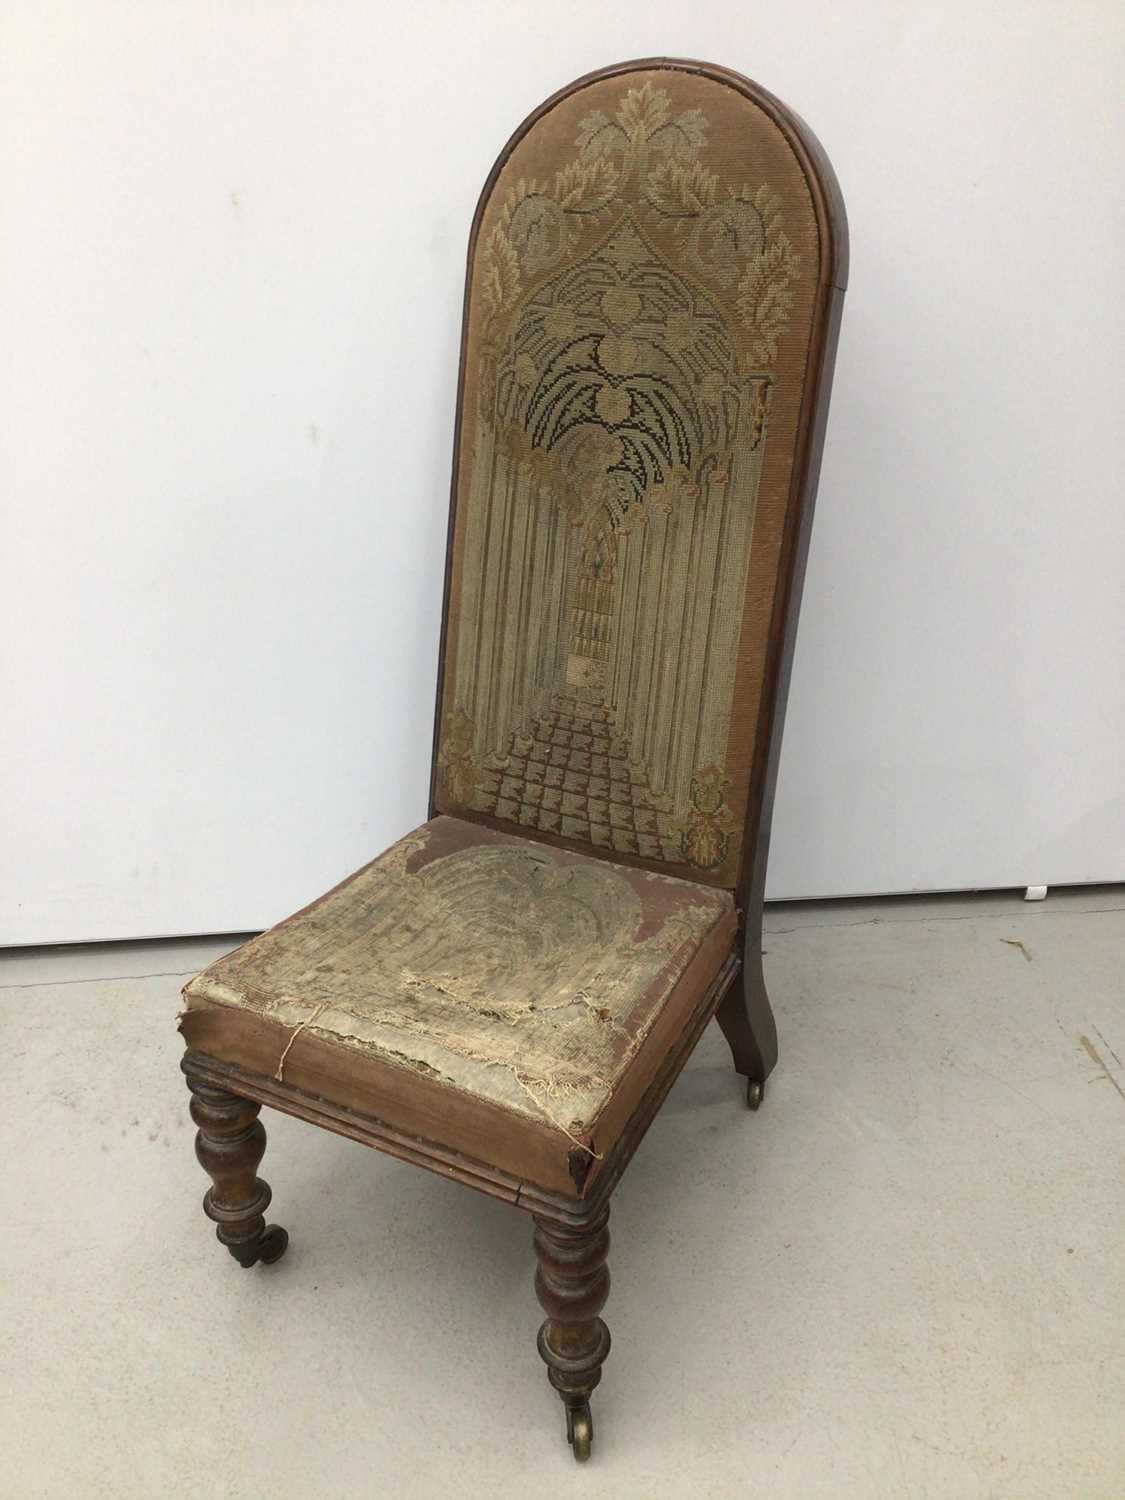 Lot 122 - Victorian rosewood prie dieu chair with arched back on turned front legs with original tapestry upholstery